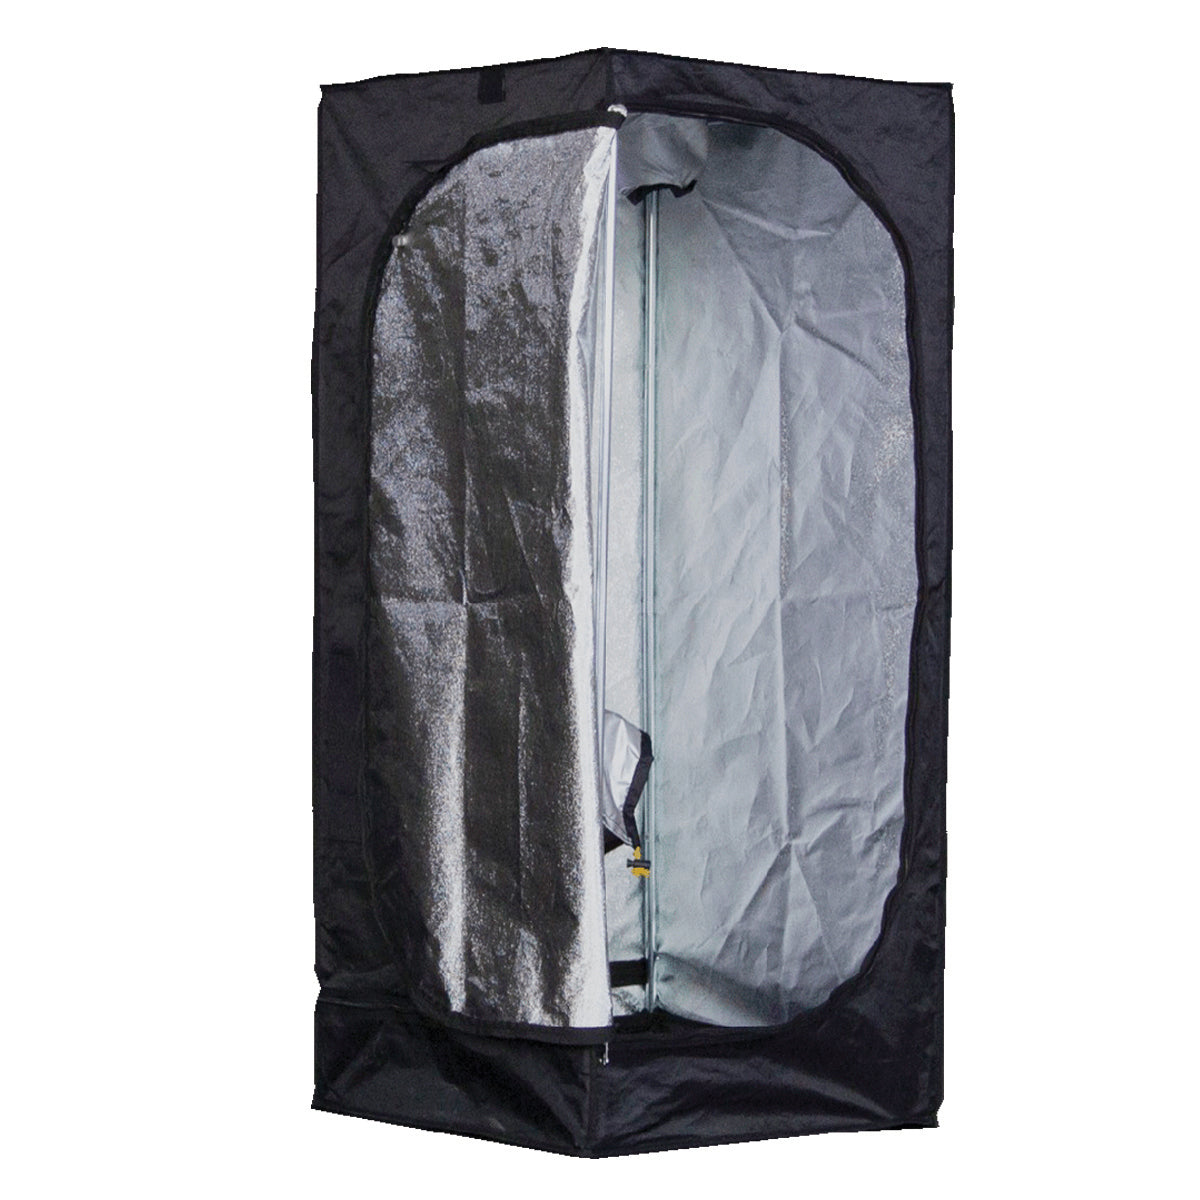 Product Image:Mammoth Classic+ 60 2' x 2' x 4.6' Grow Tent